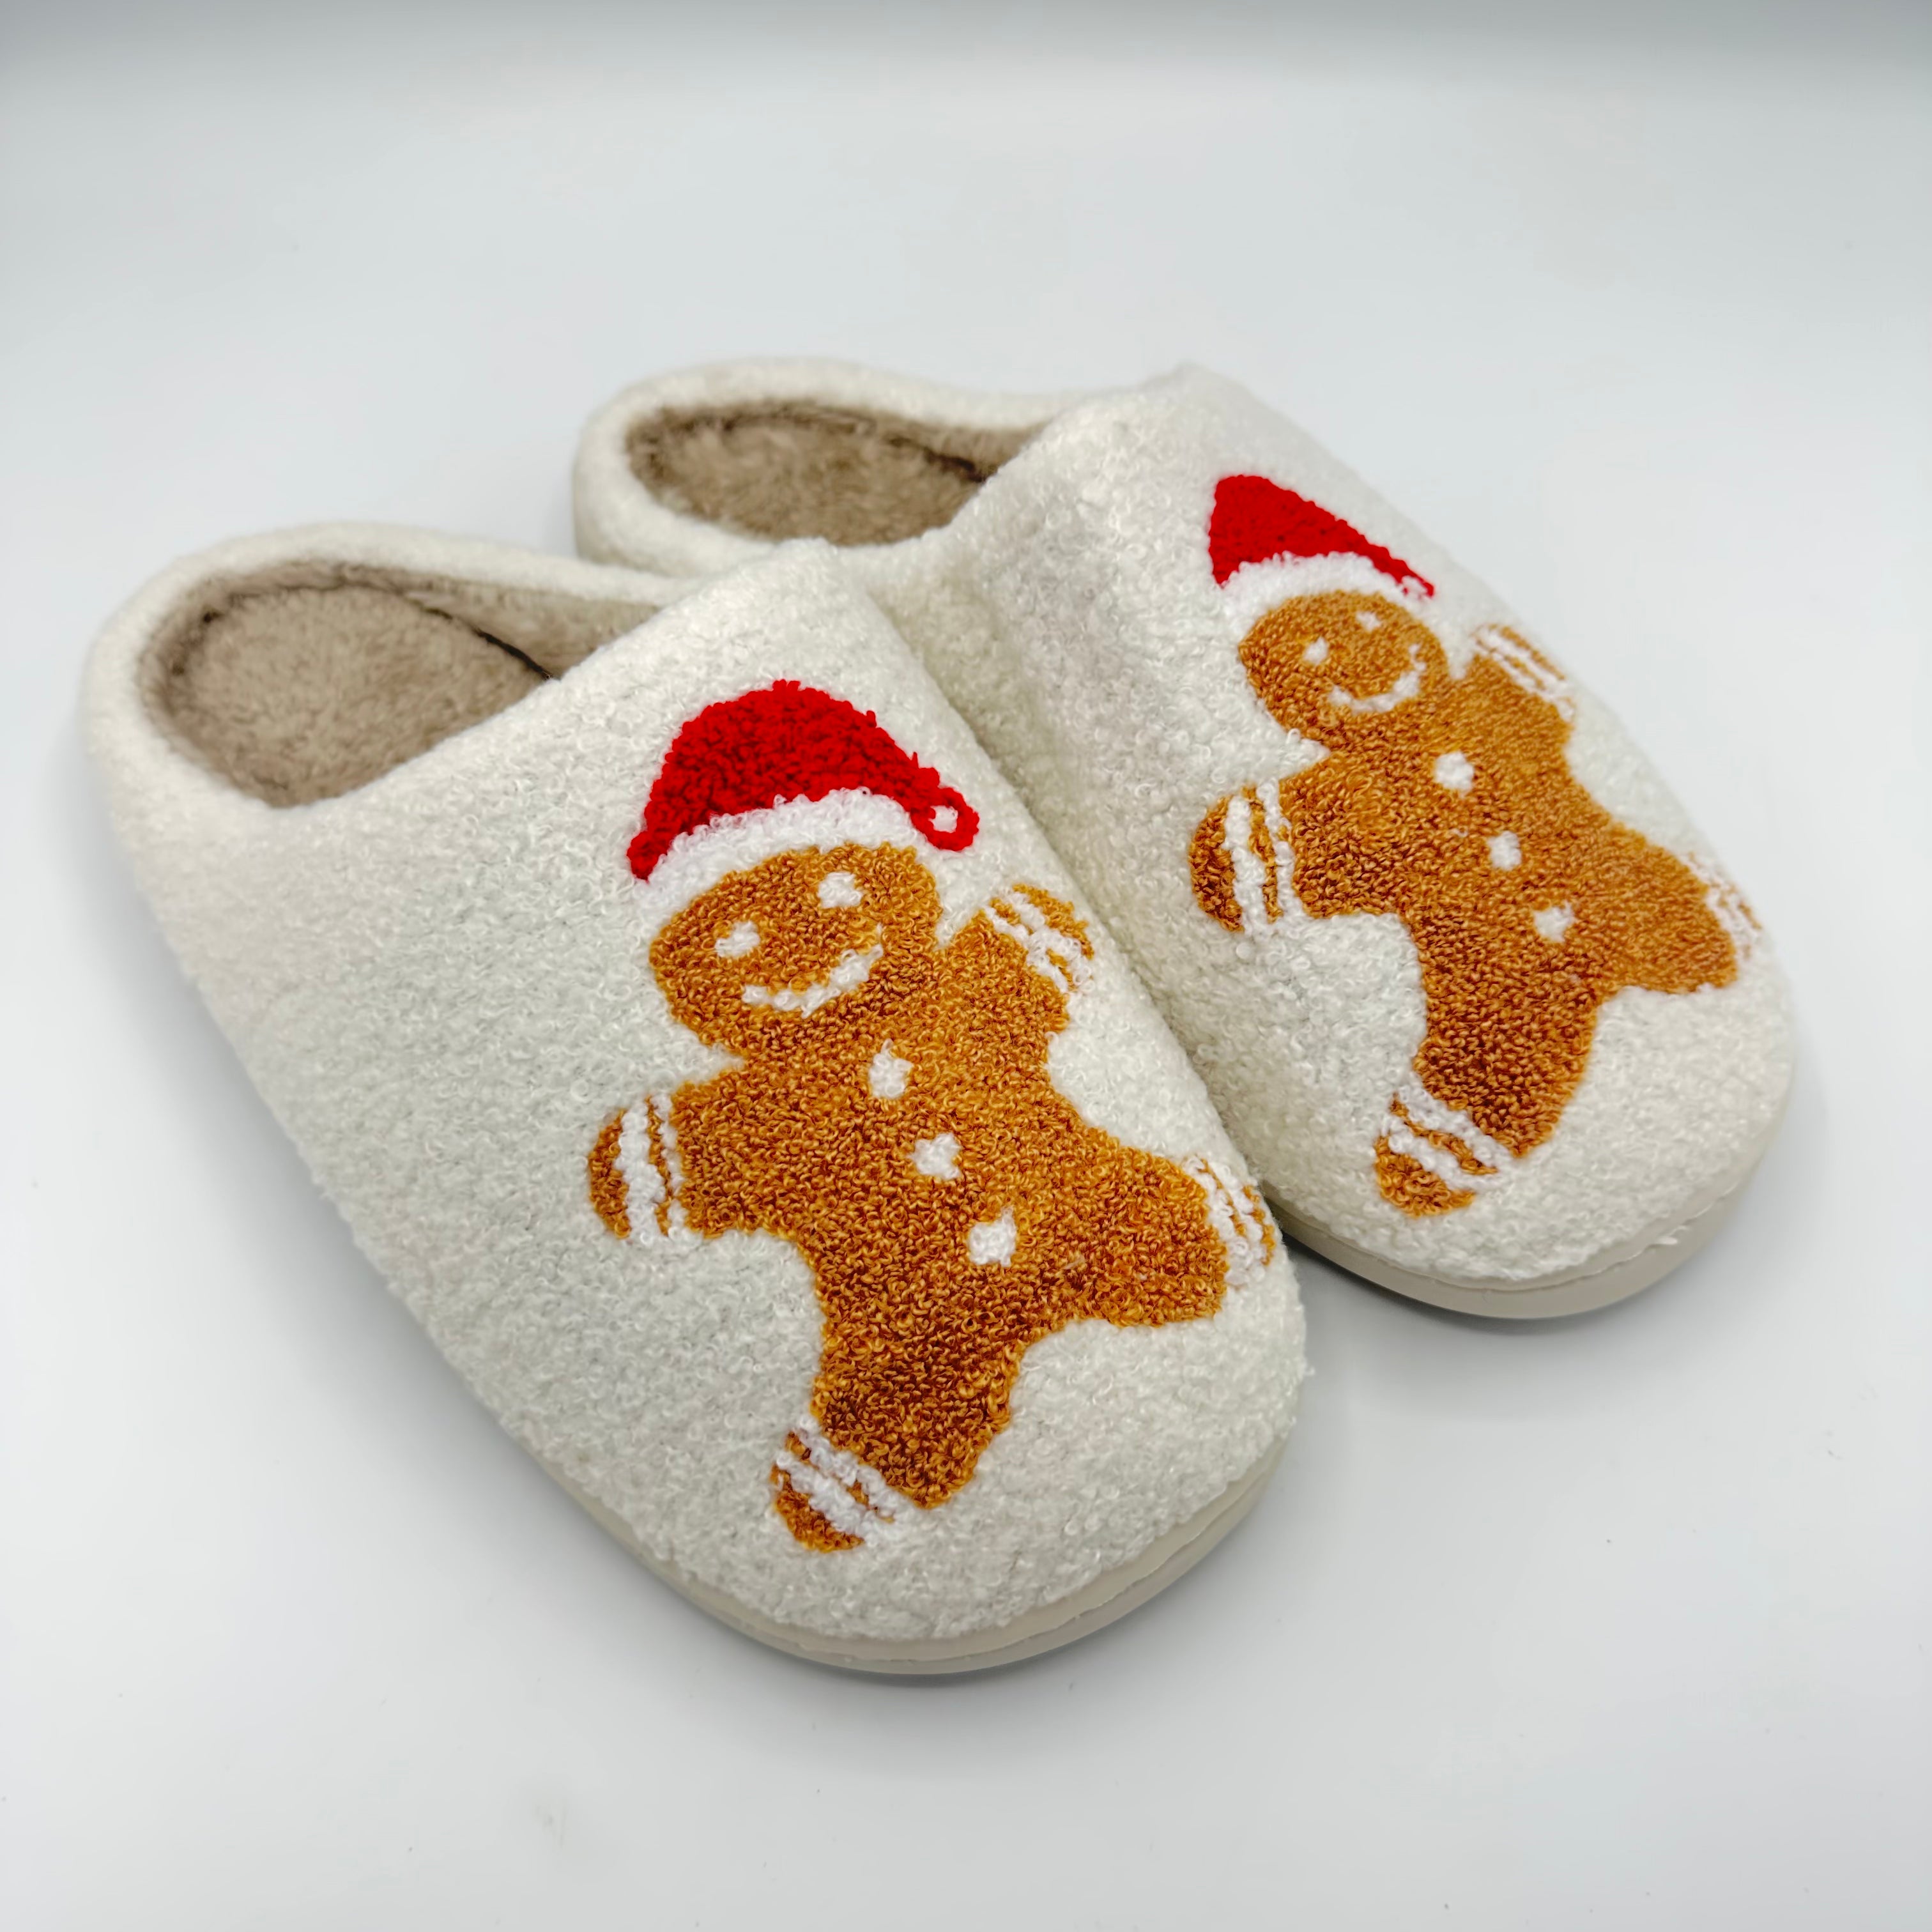 Gingerbread Man Slippers